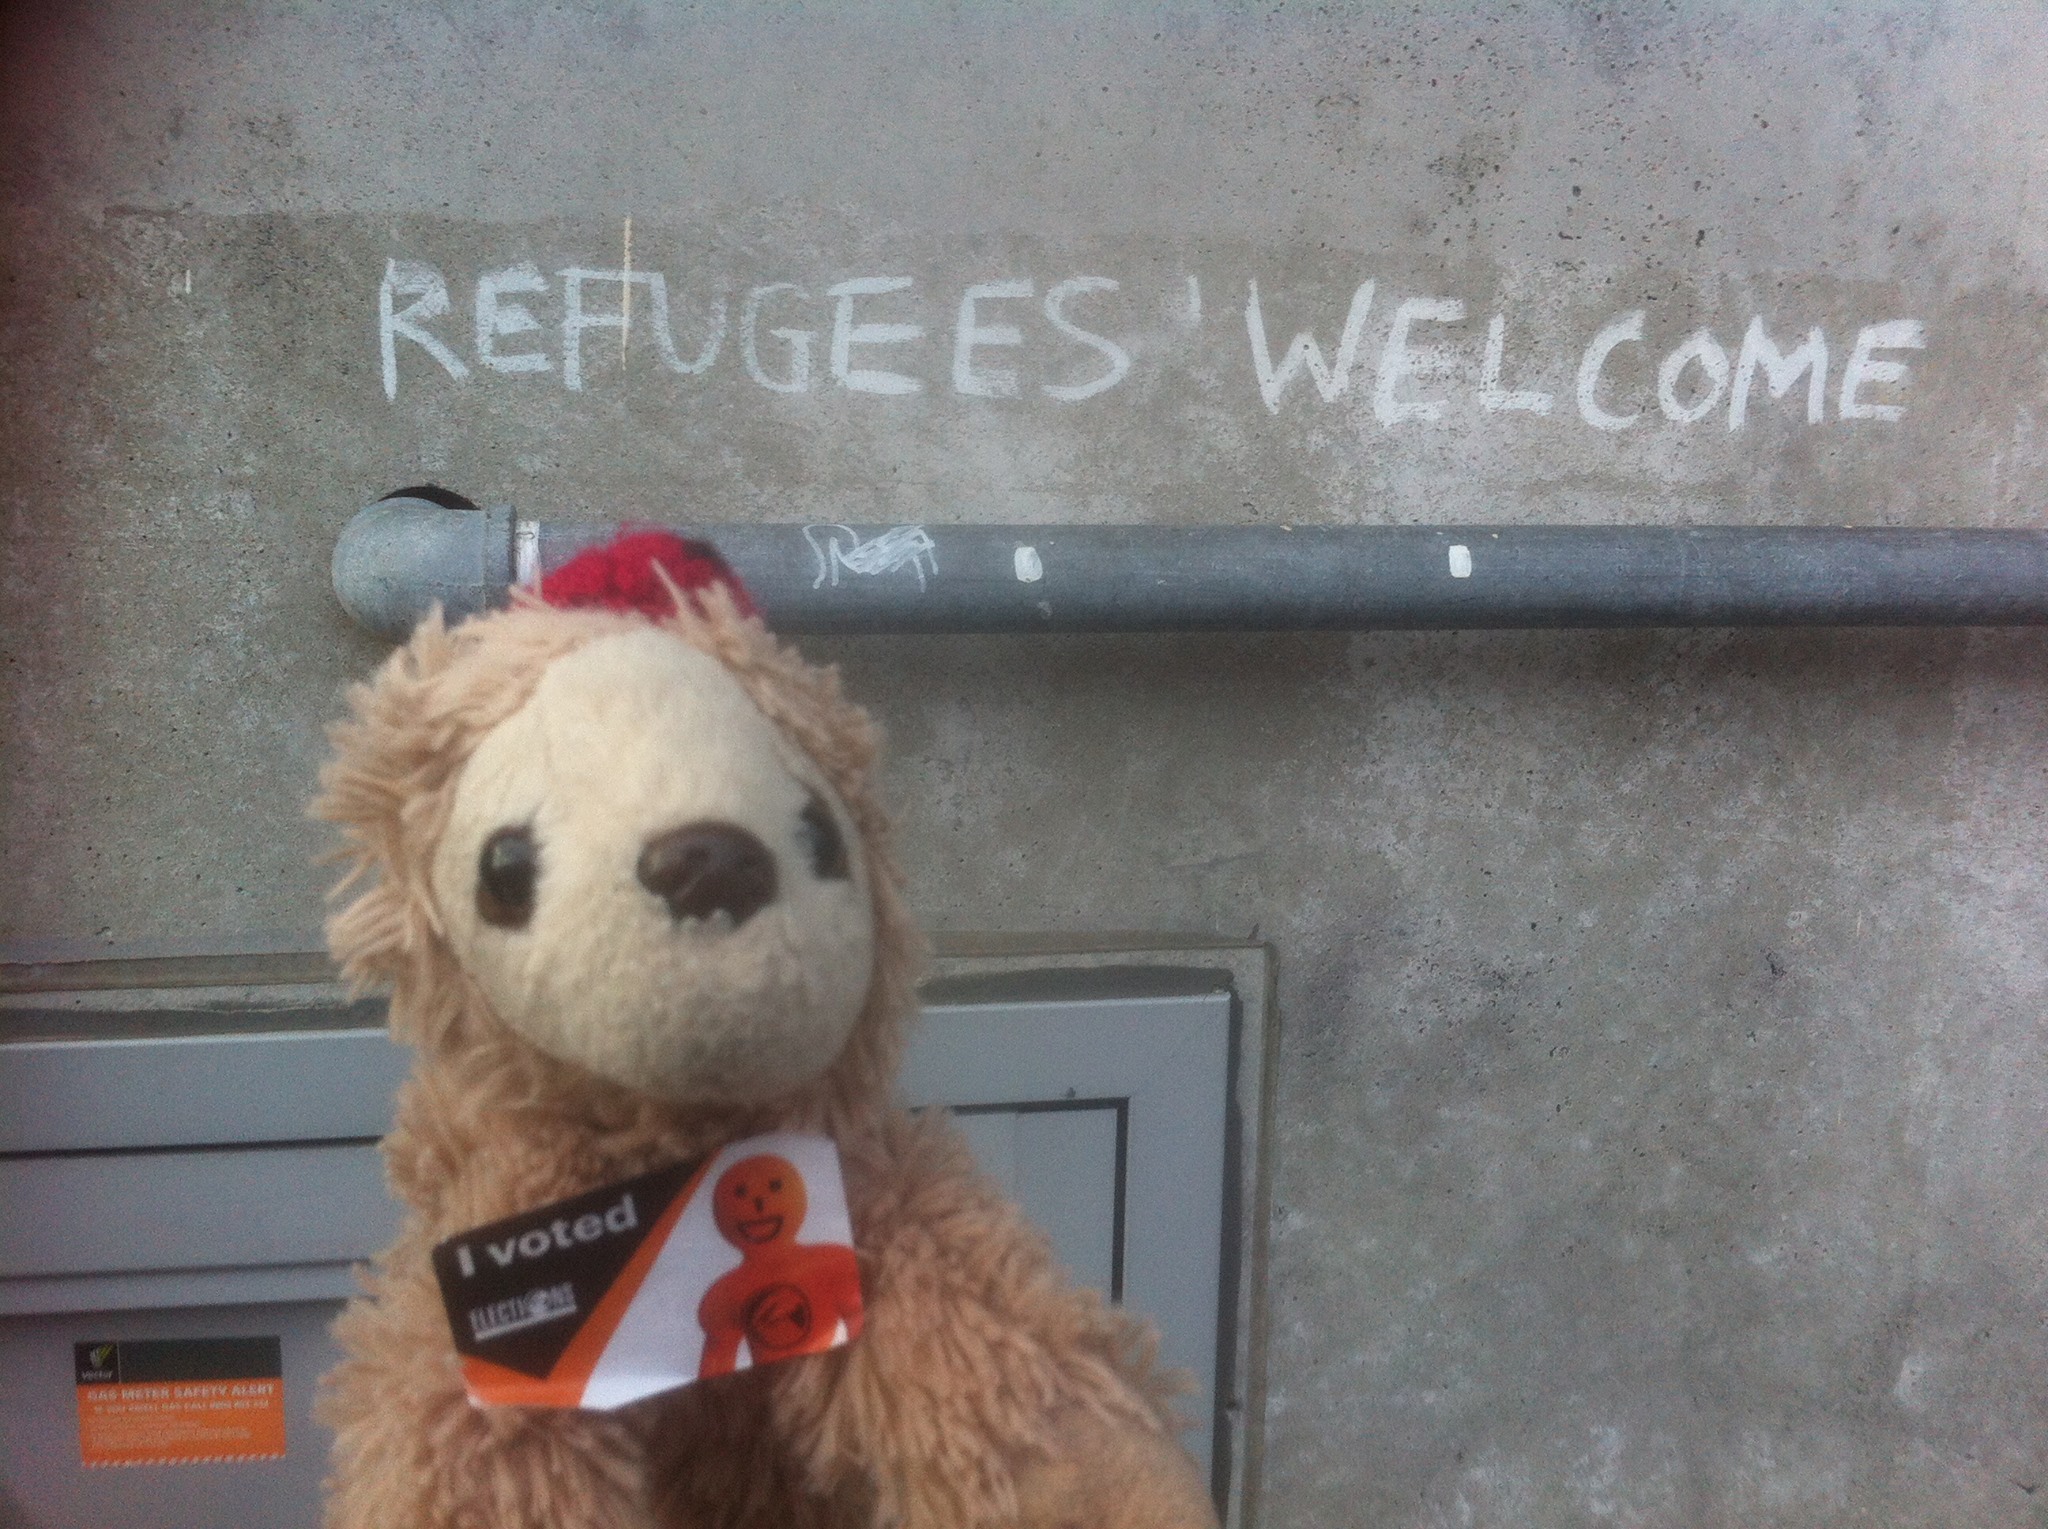 comrade snuggleton by some graffiti that reads "refugees welcome"